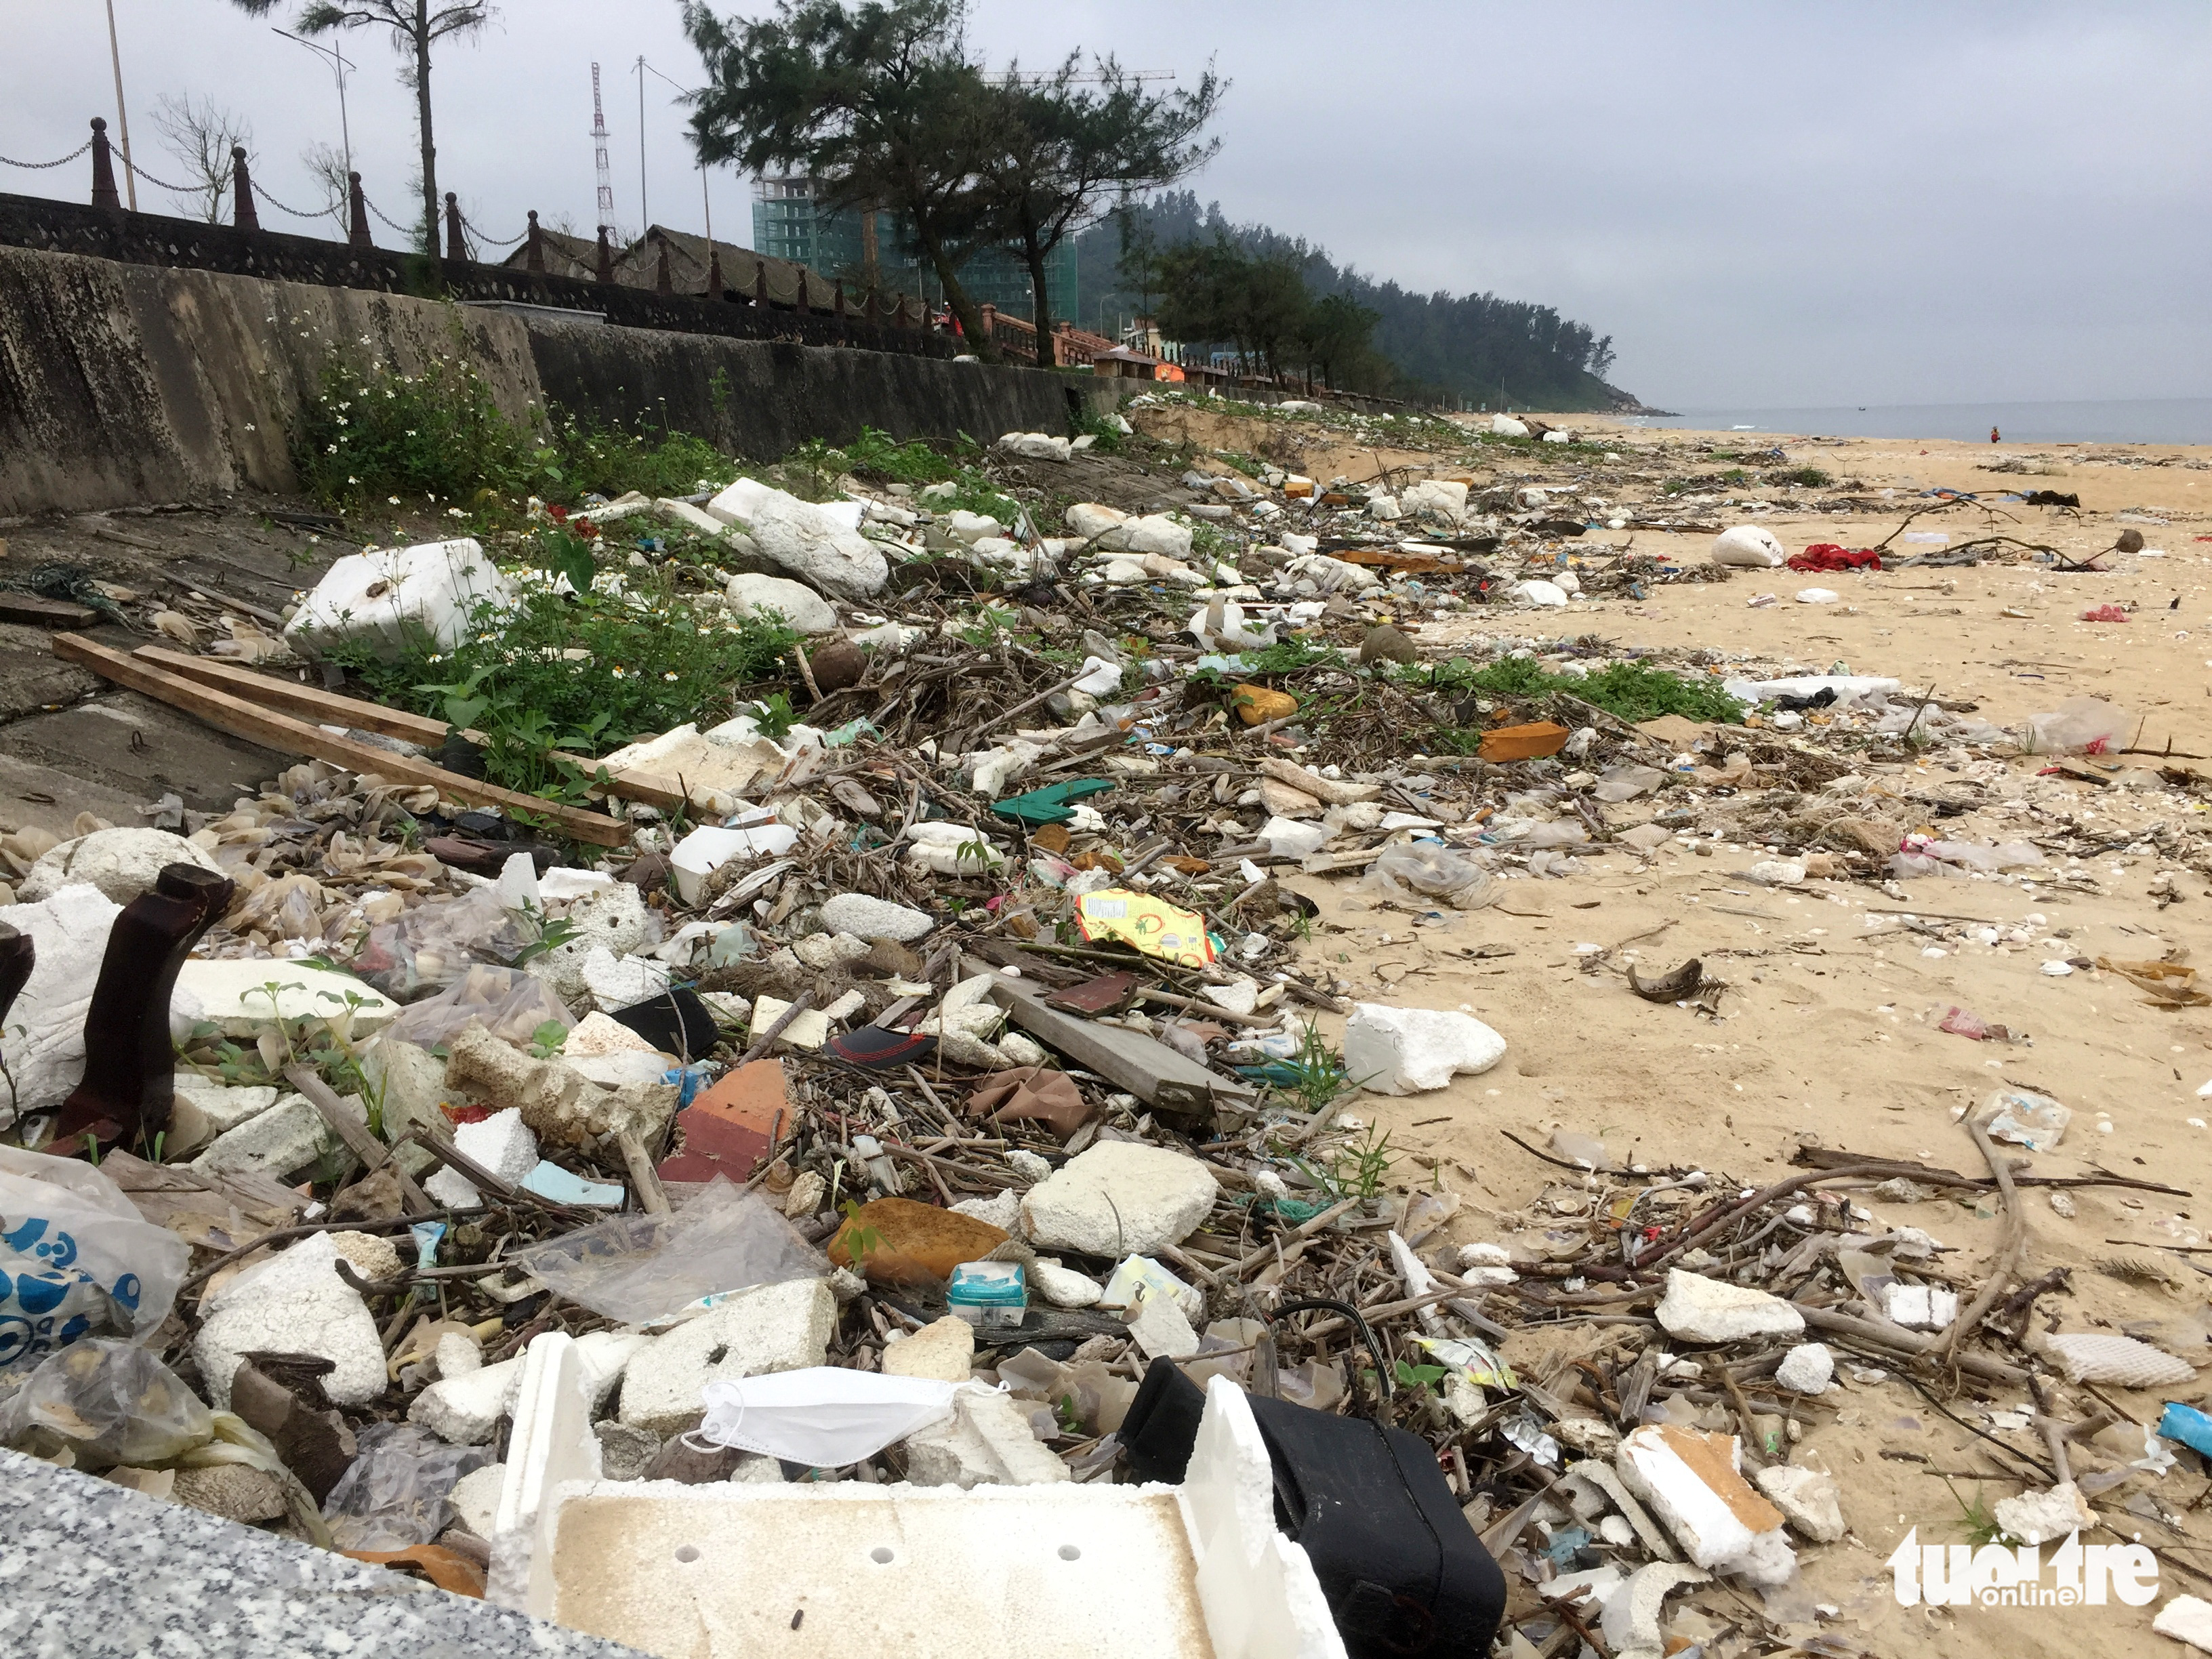 Thien Cam Beach is filled with rubbish in Cam Xuyen District, Ha Tinh Province, March 19, 2022. Photo: Le Minh / Tuoi Tre